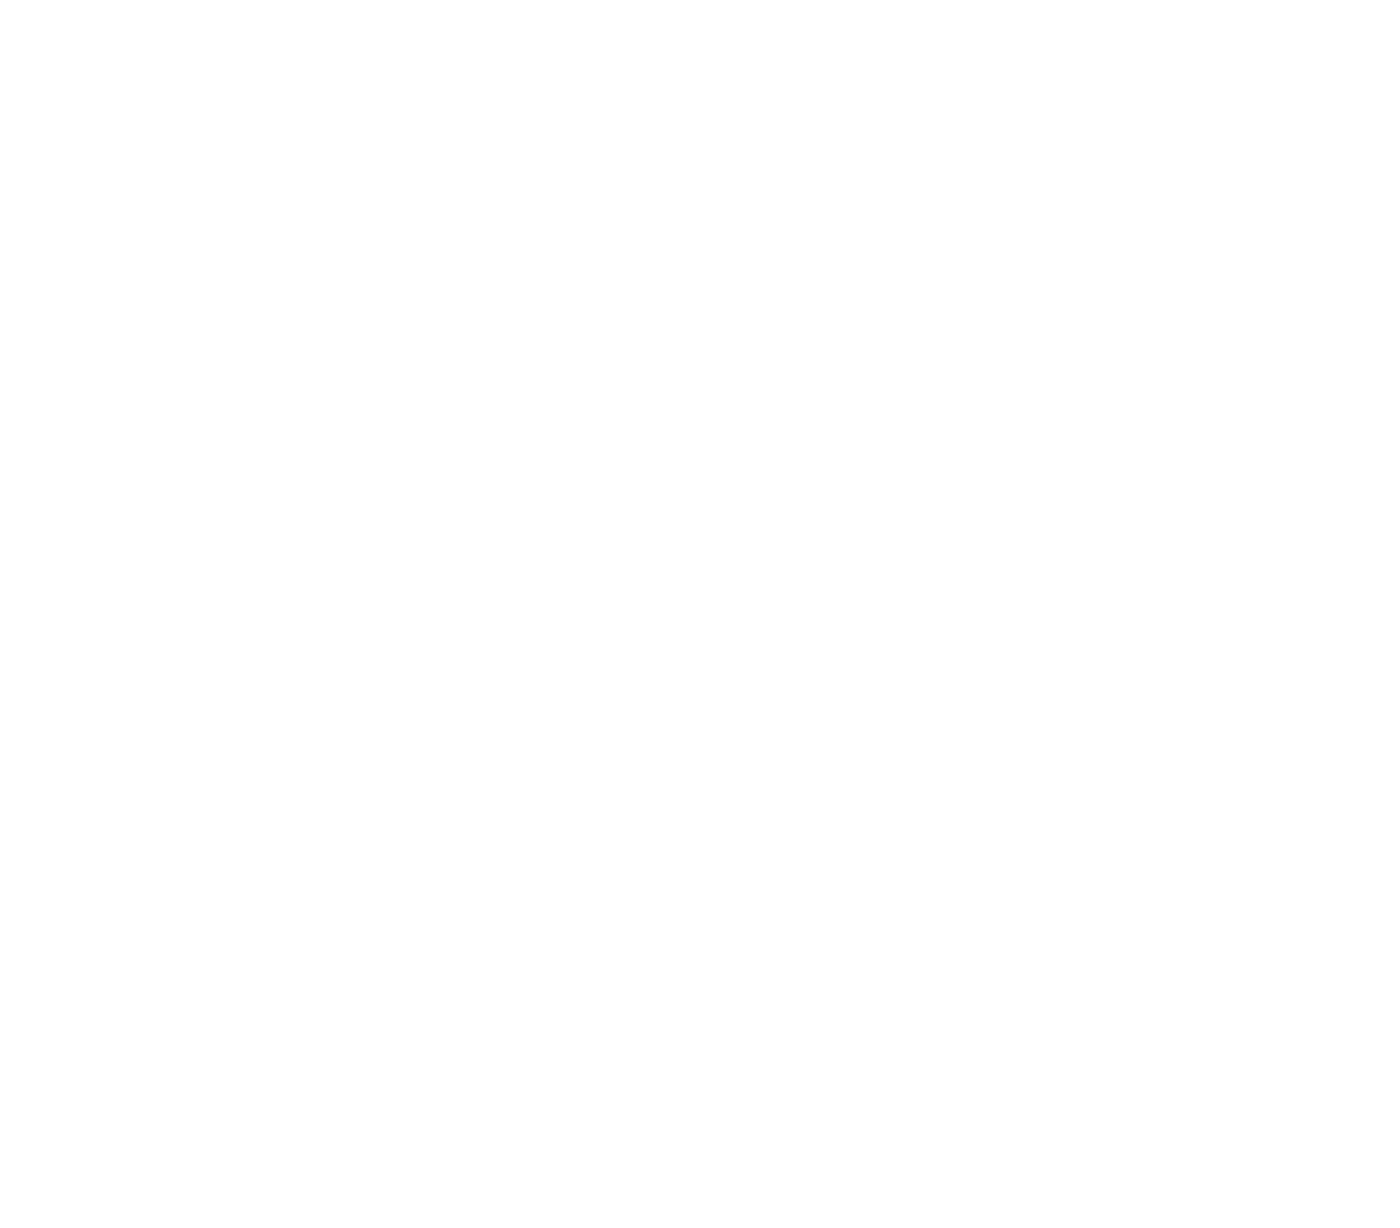 Delaine & Co. Crafted in the U.S.A. Established 2020.